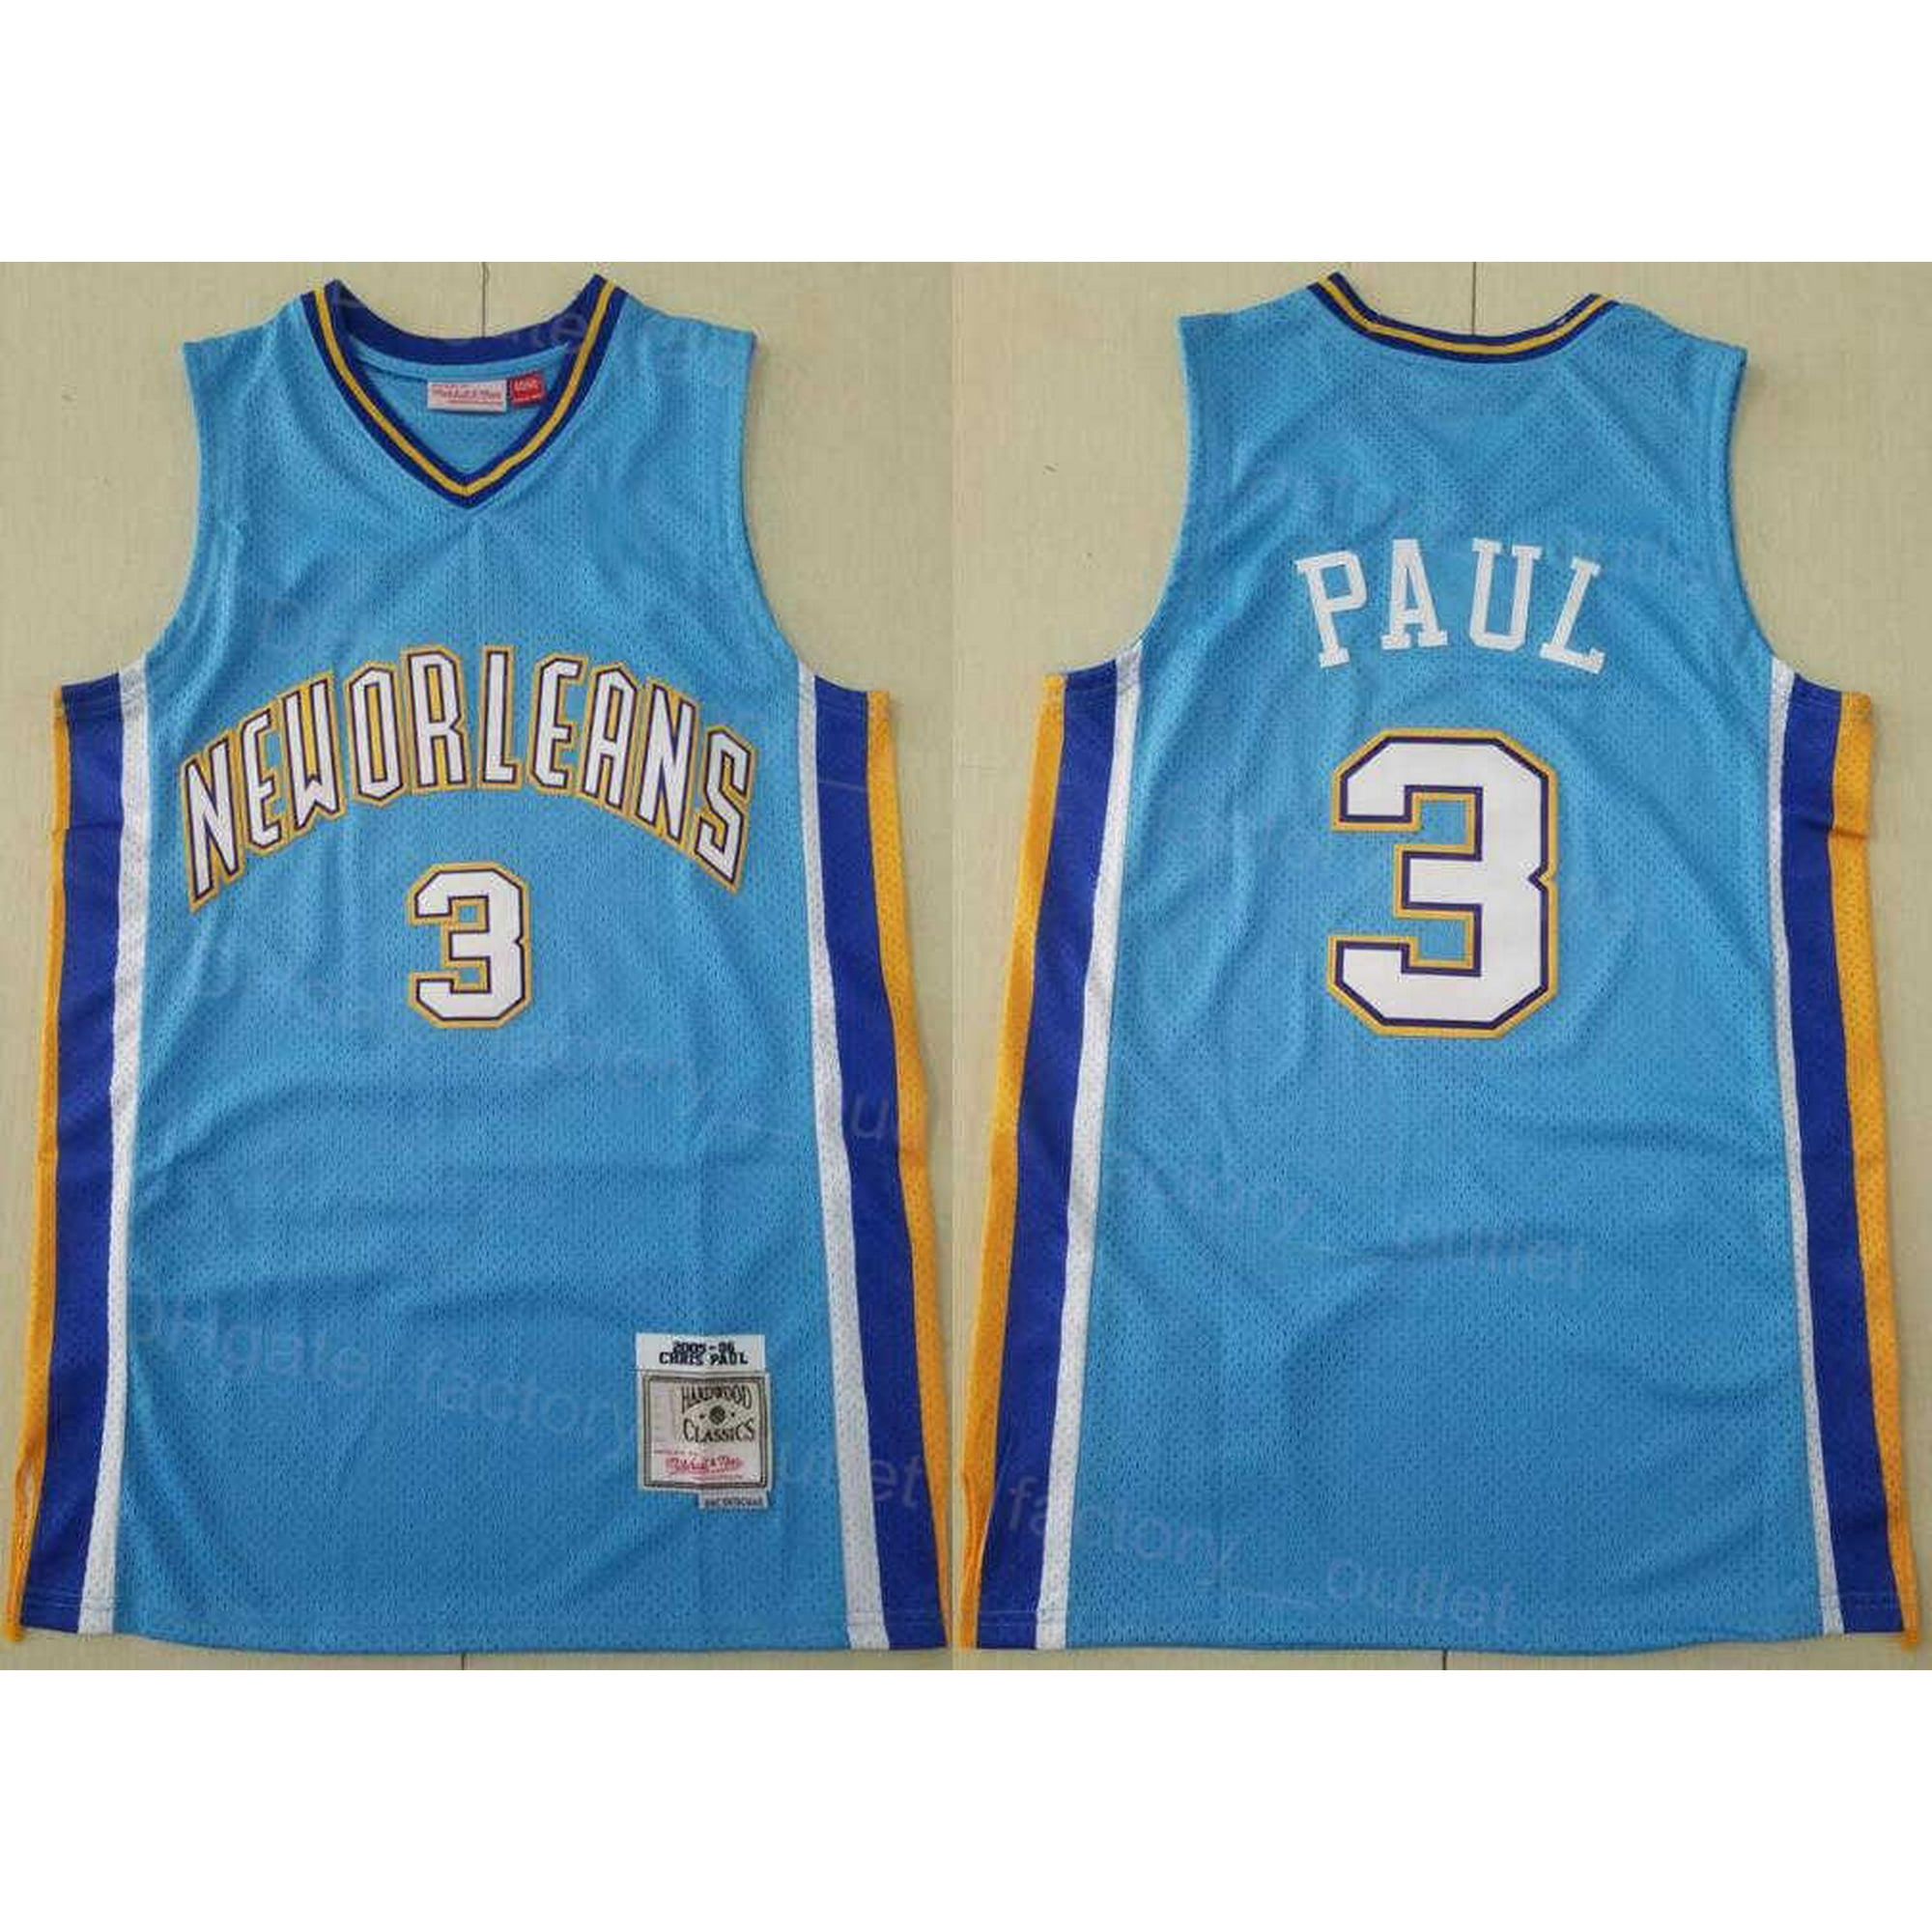 muggsy bogues authentic jersey